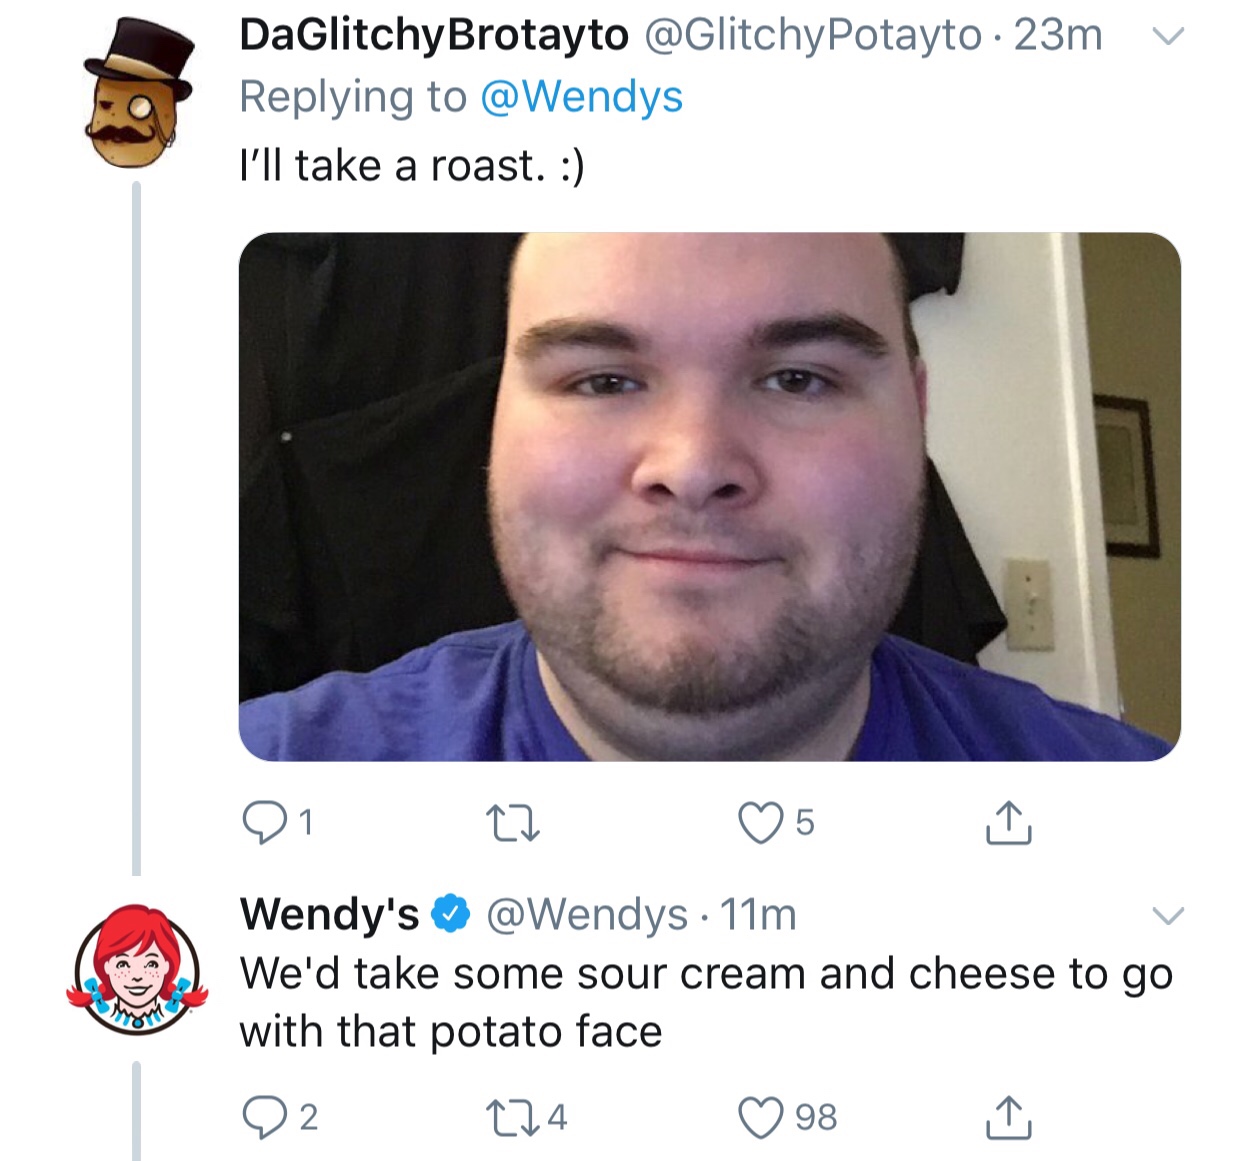 tweet - roasting people - v DaGlitchyBrotayto 23m I'll take a roast. 0127 51 Wendy's 11m We'd take some sour cream and cheese to go with that potato face 22 224 98